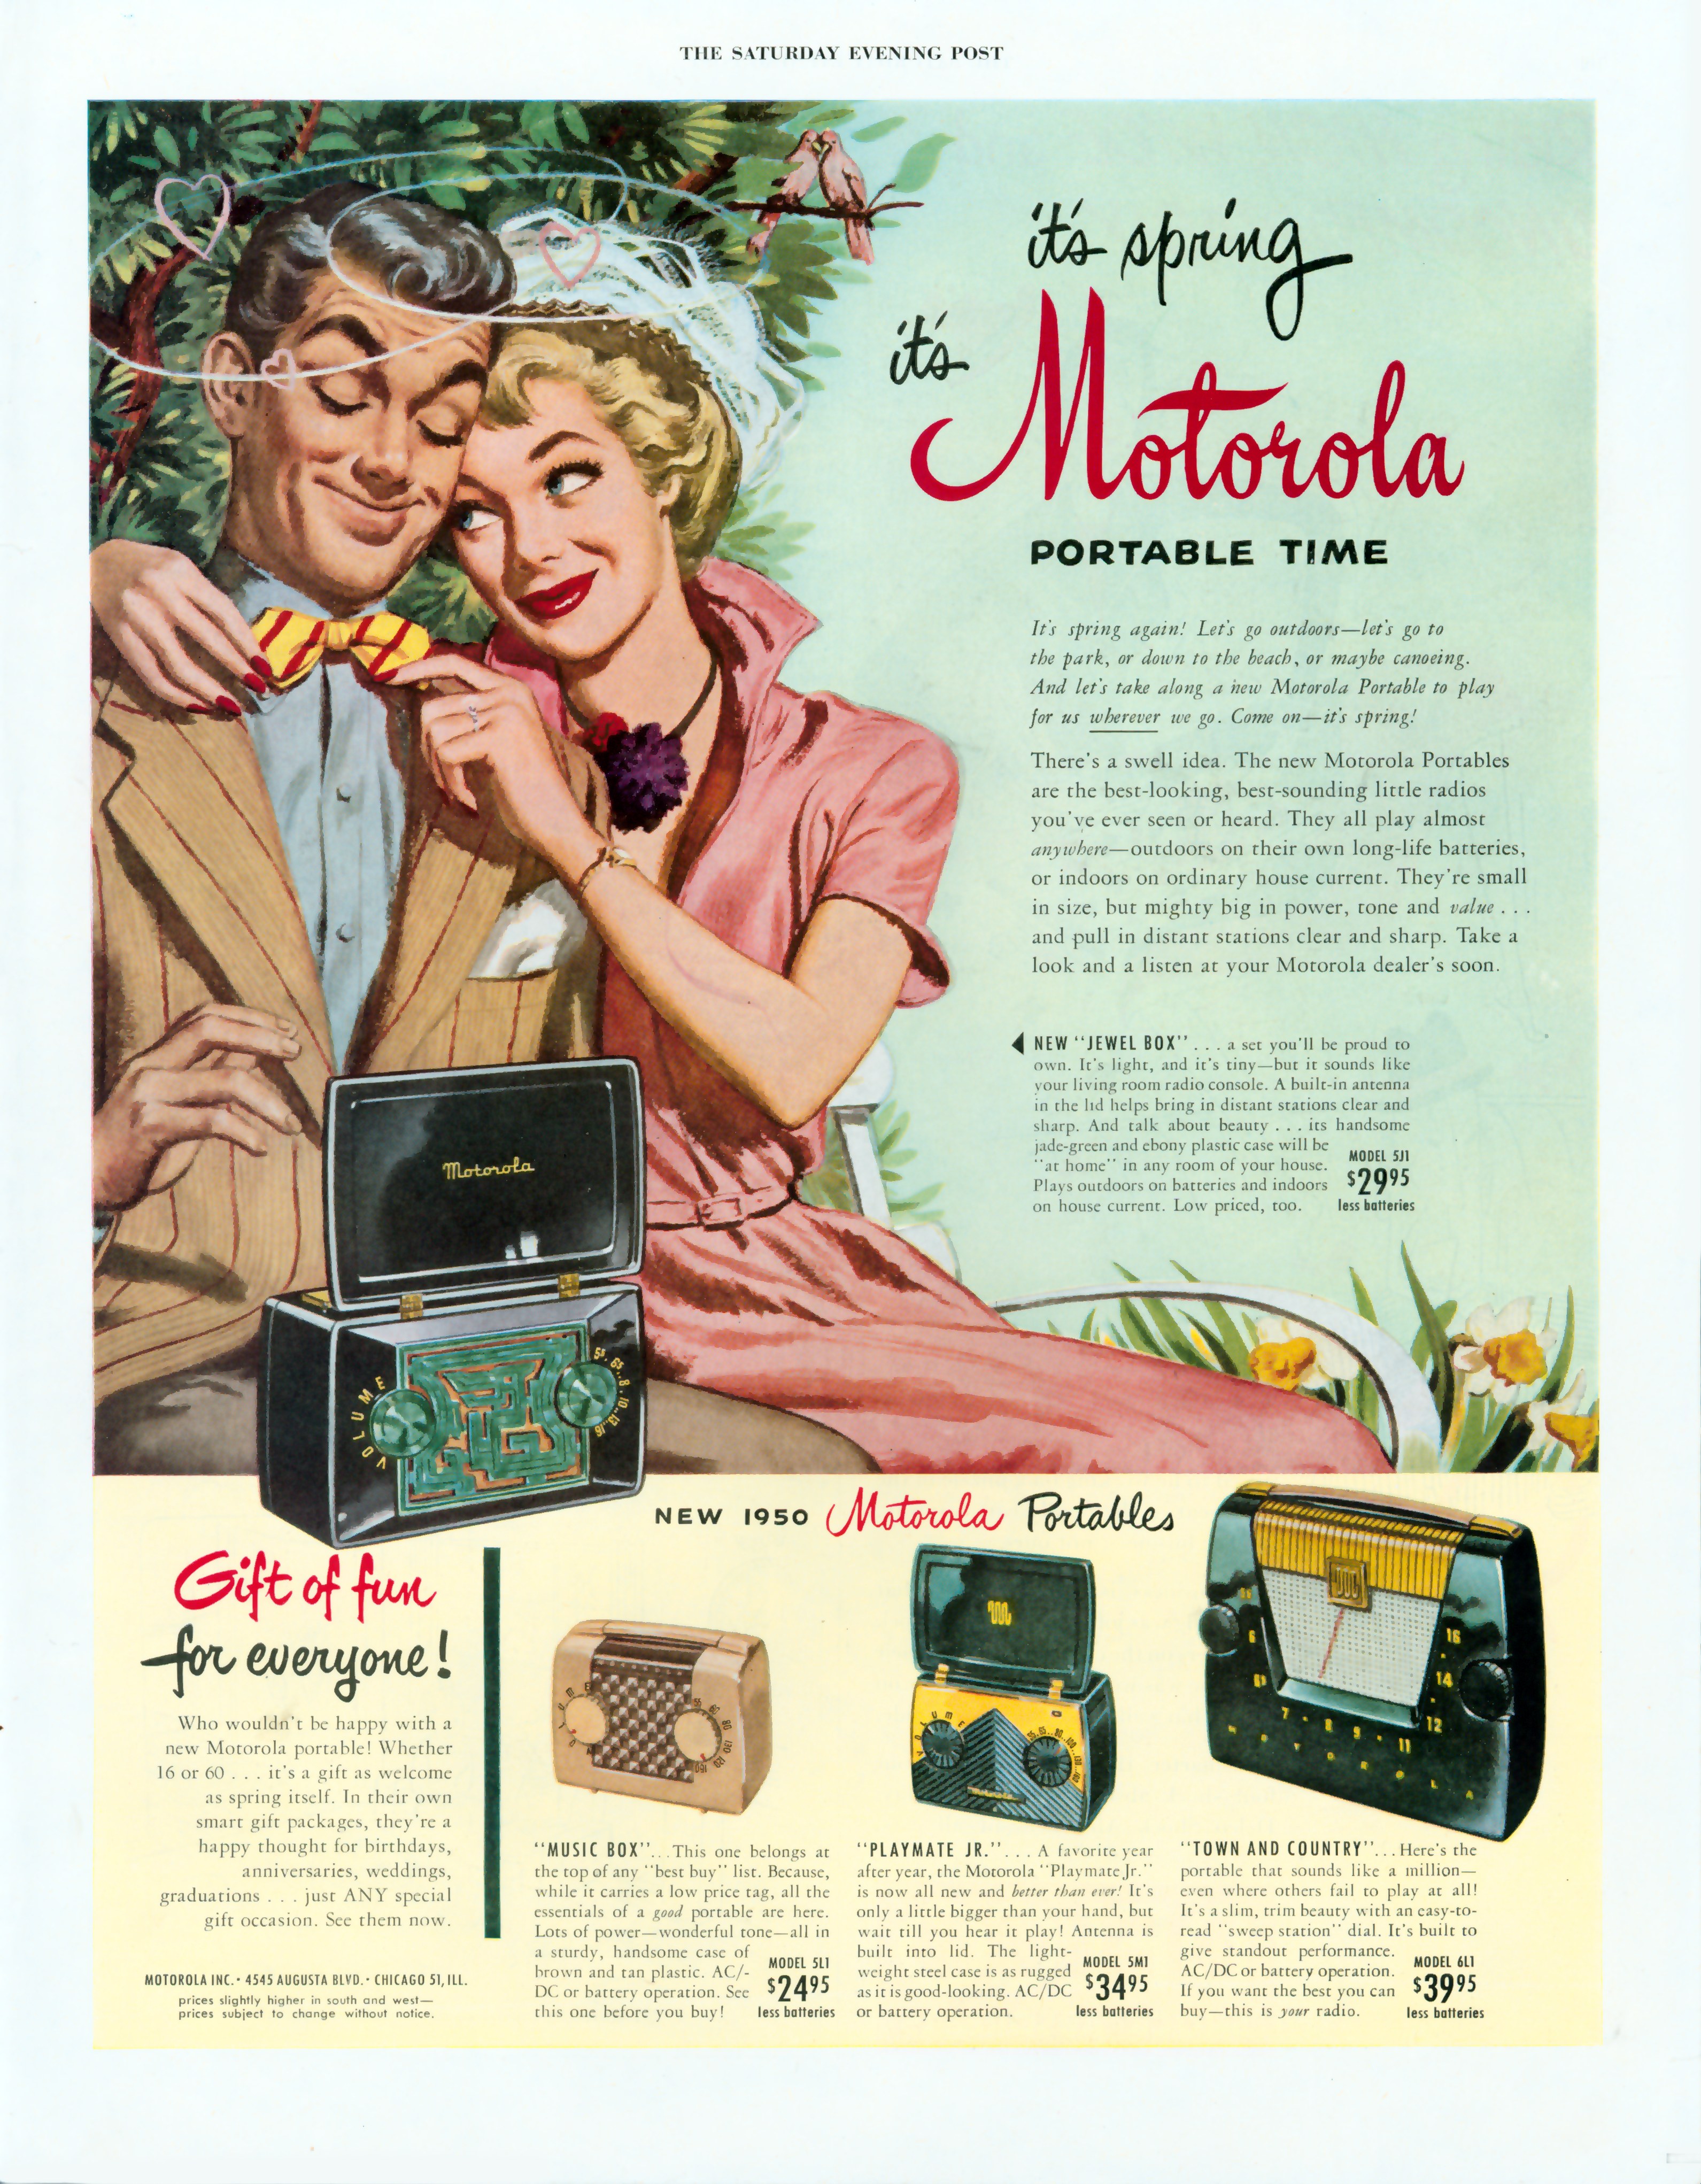 Advertisement for portable radios; illustrations of four radios and a man and woman.